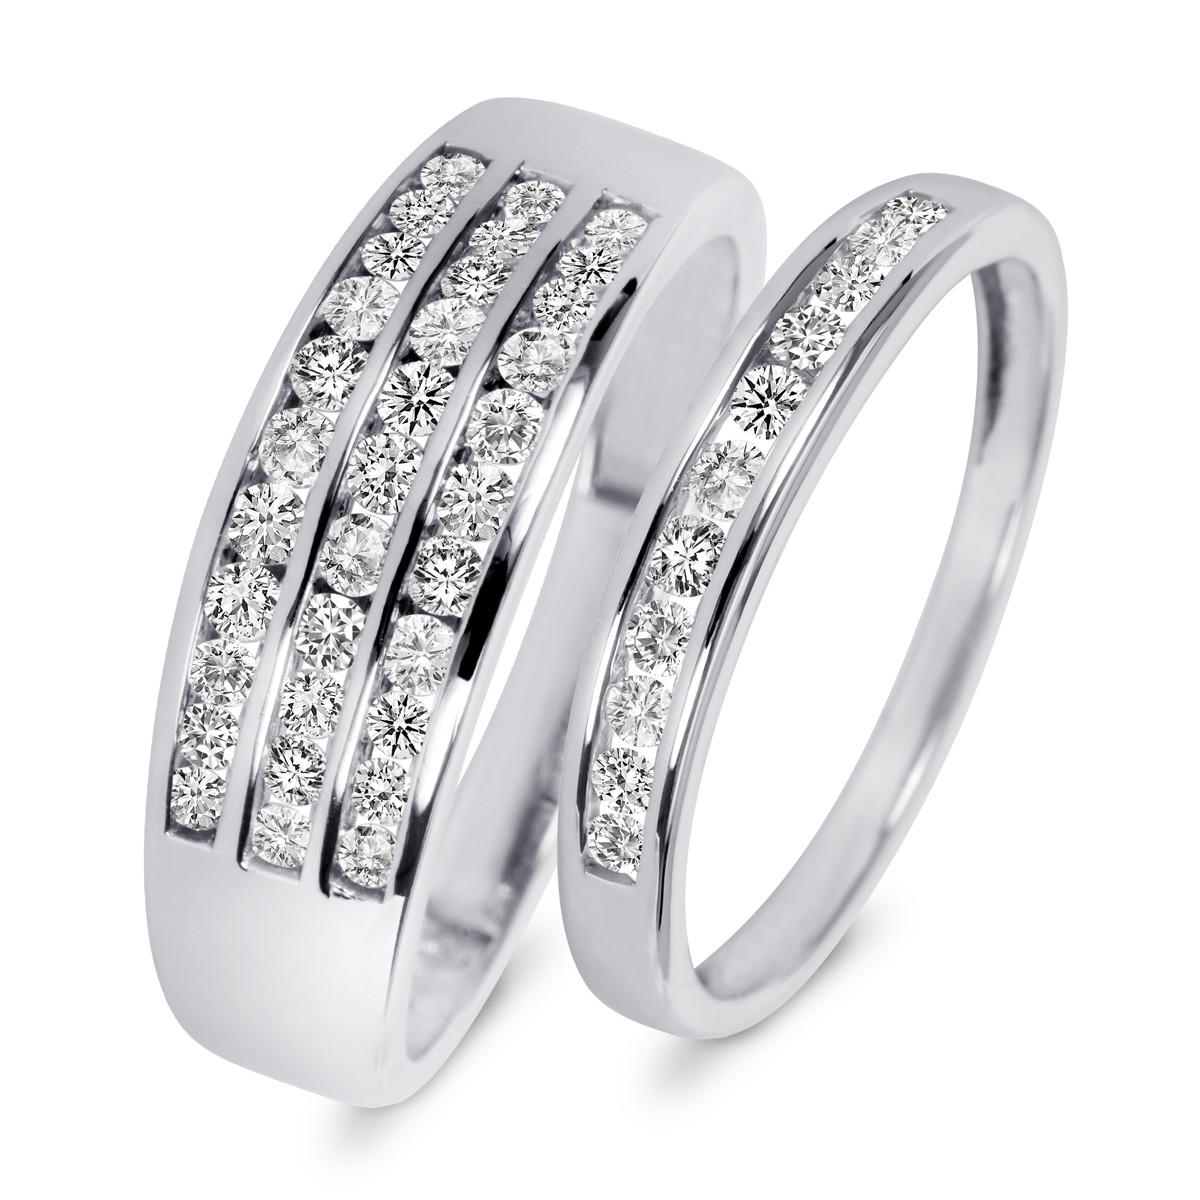 His And Hers Wedding Bands White Gold
 7 8 Carat T W Diamond His And Hers Wedding Rings 14K